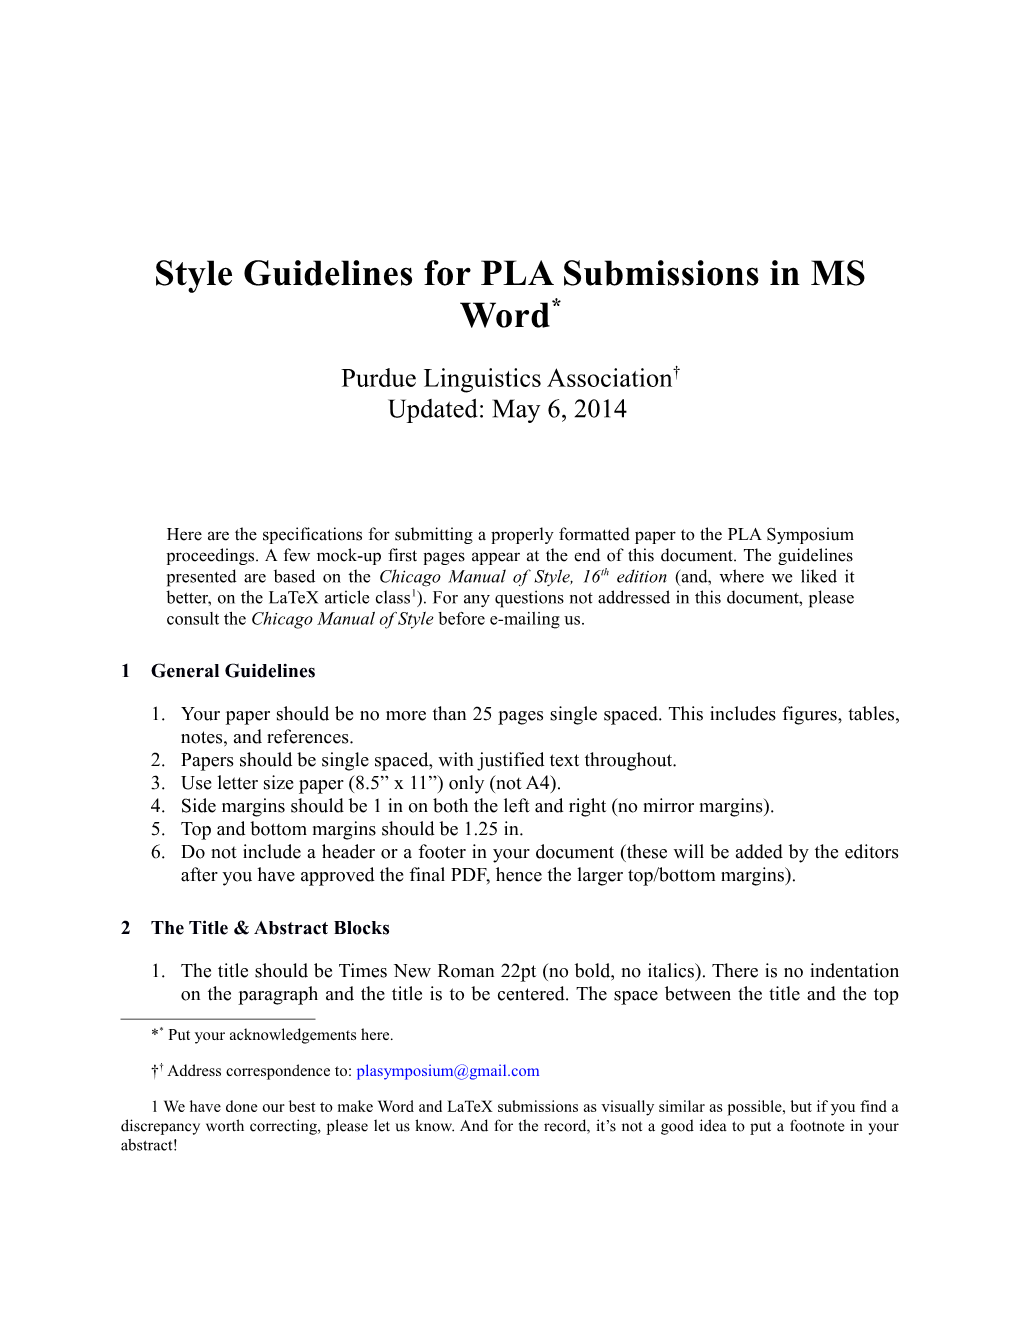 Style Guidelines for PLA Submissions in MS Word *